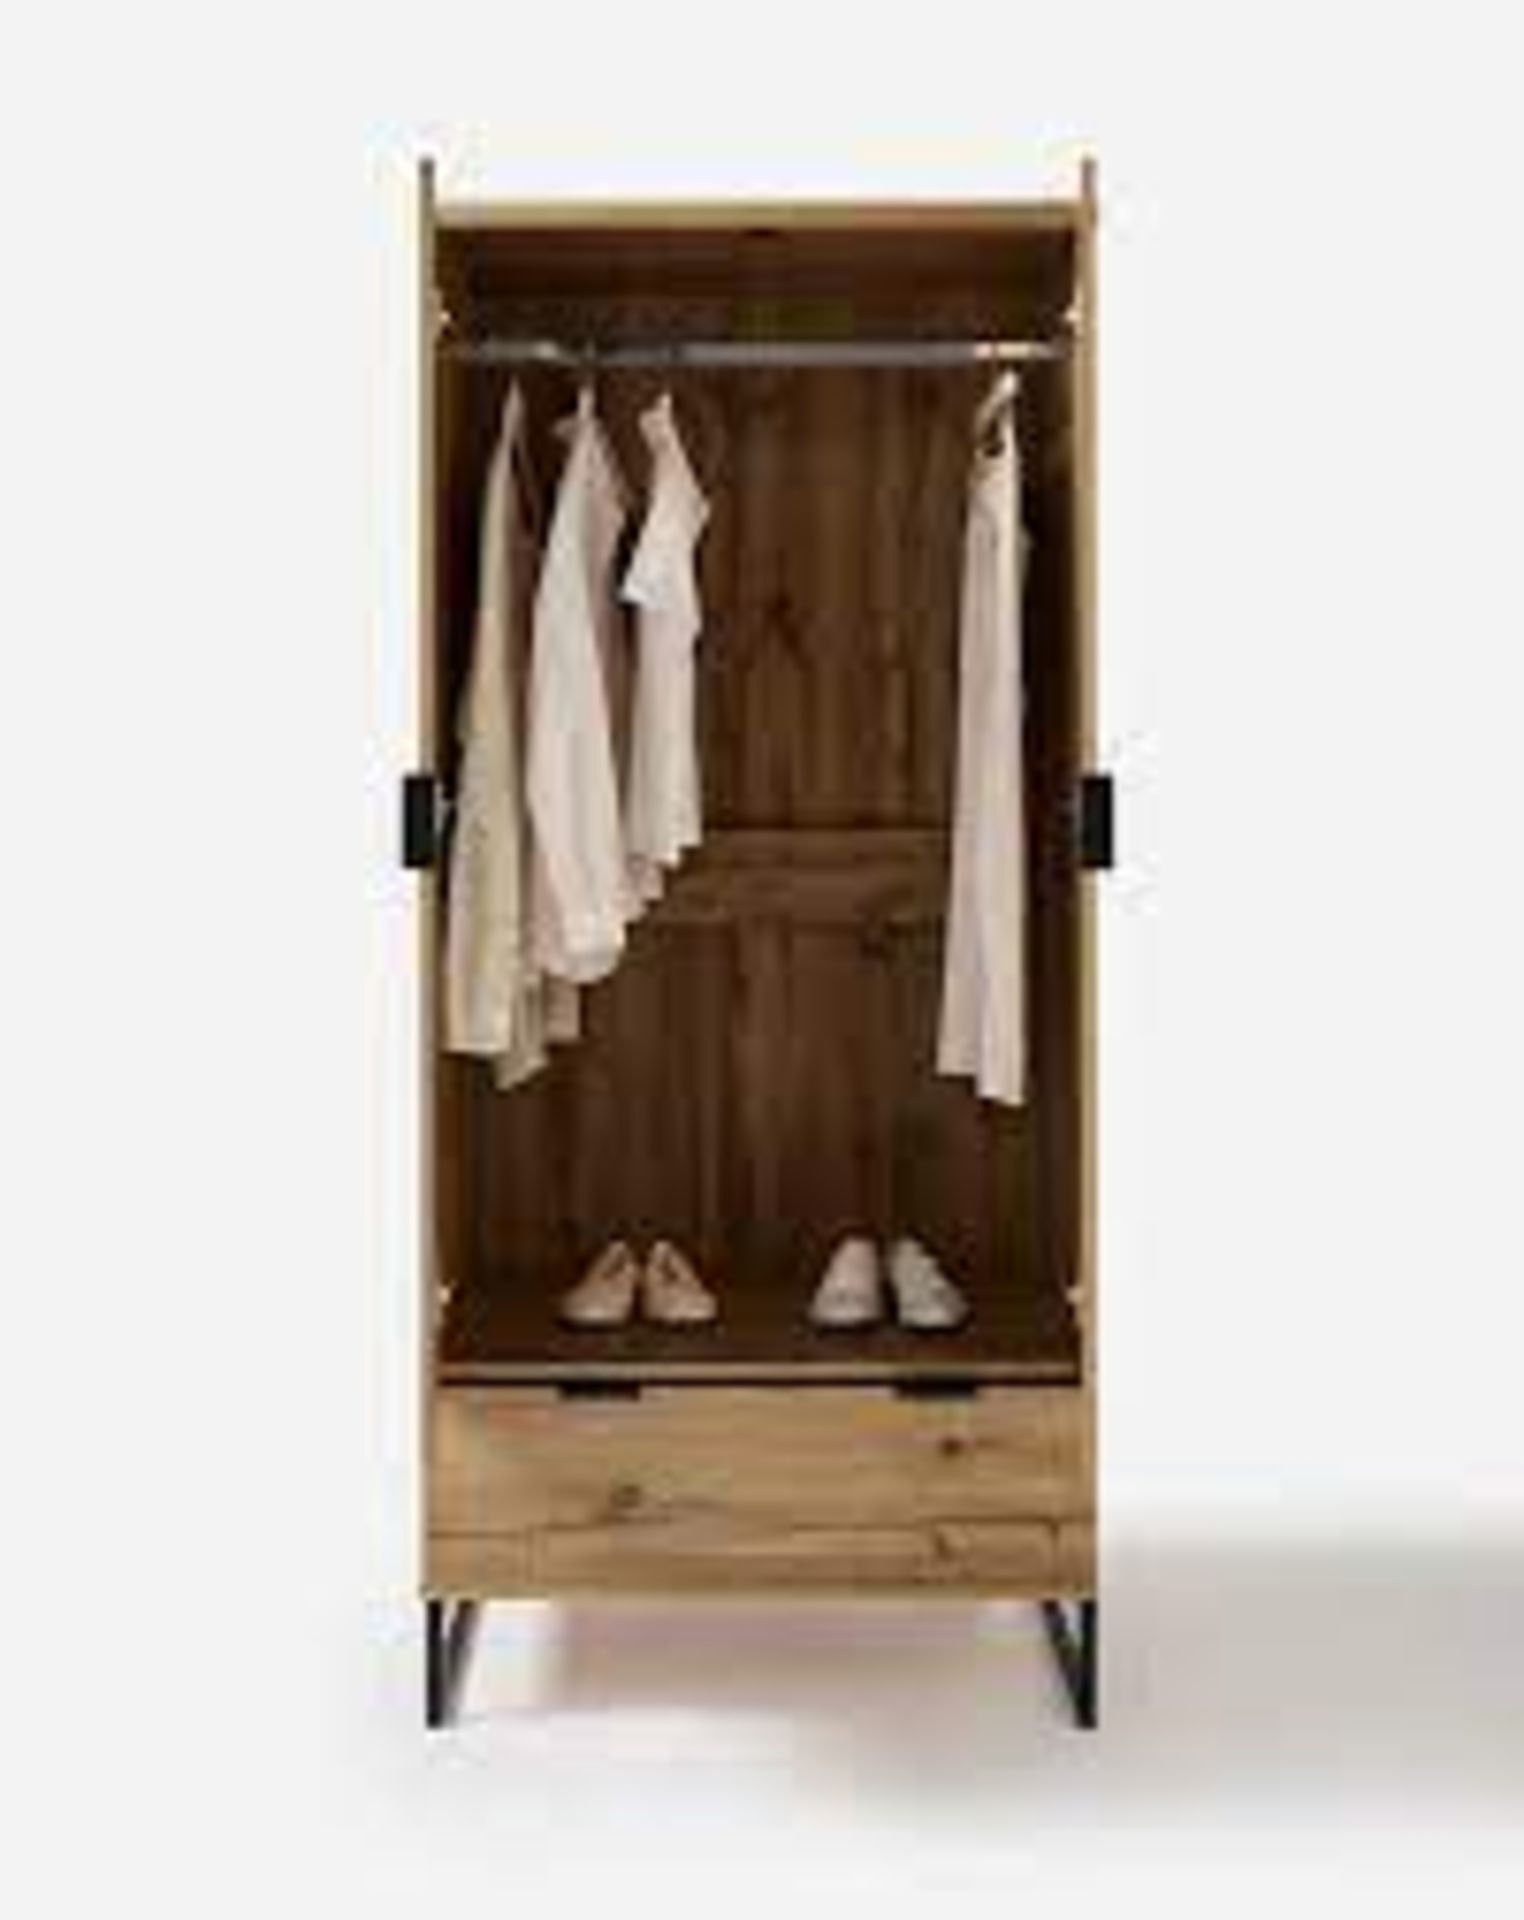 BRAND NEW Oak Shoreditch Wardrobe. RRP £299 EACH. The Shoreditch Range has a contemporary and - Image 2 of 2